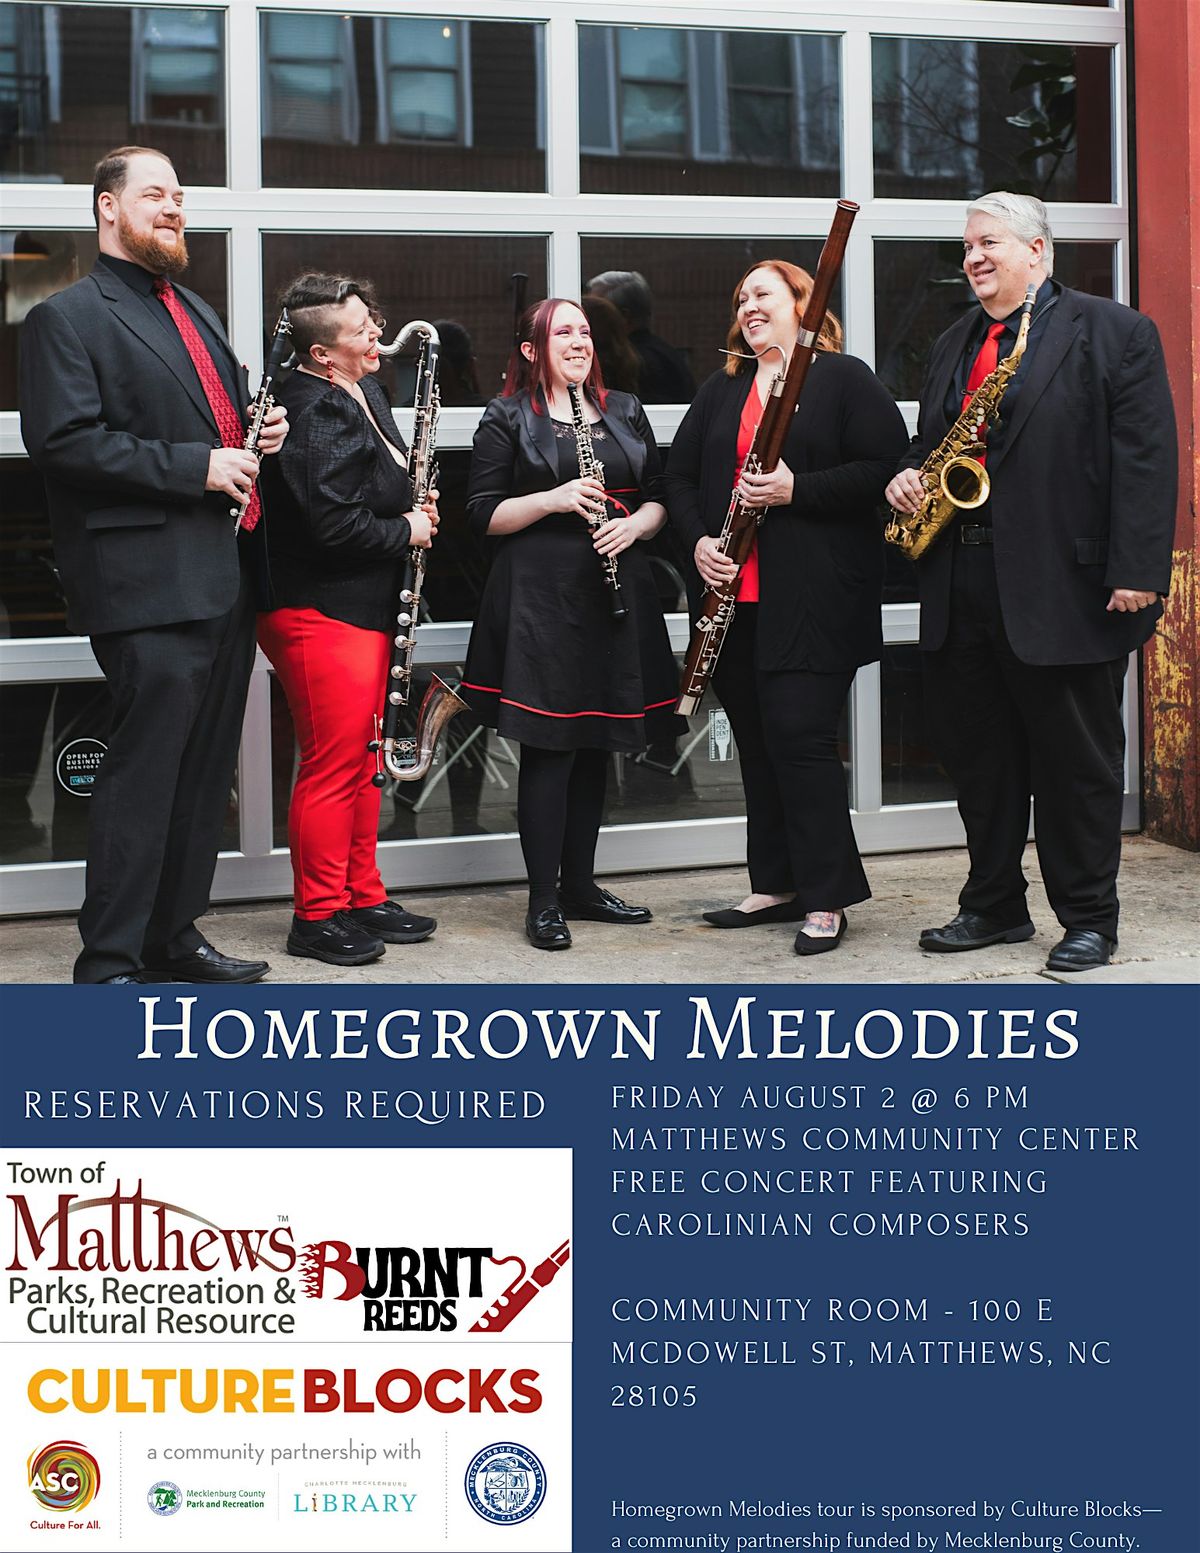 Homegrown Melodies Charlotte Tour at the Matthews Community Center